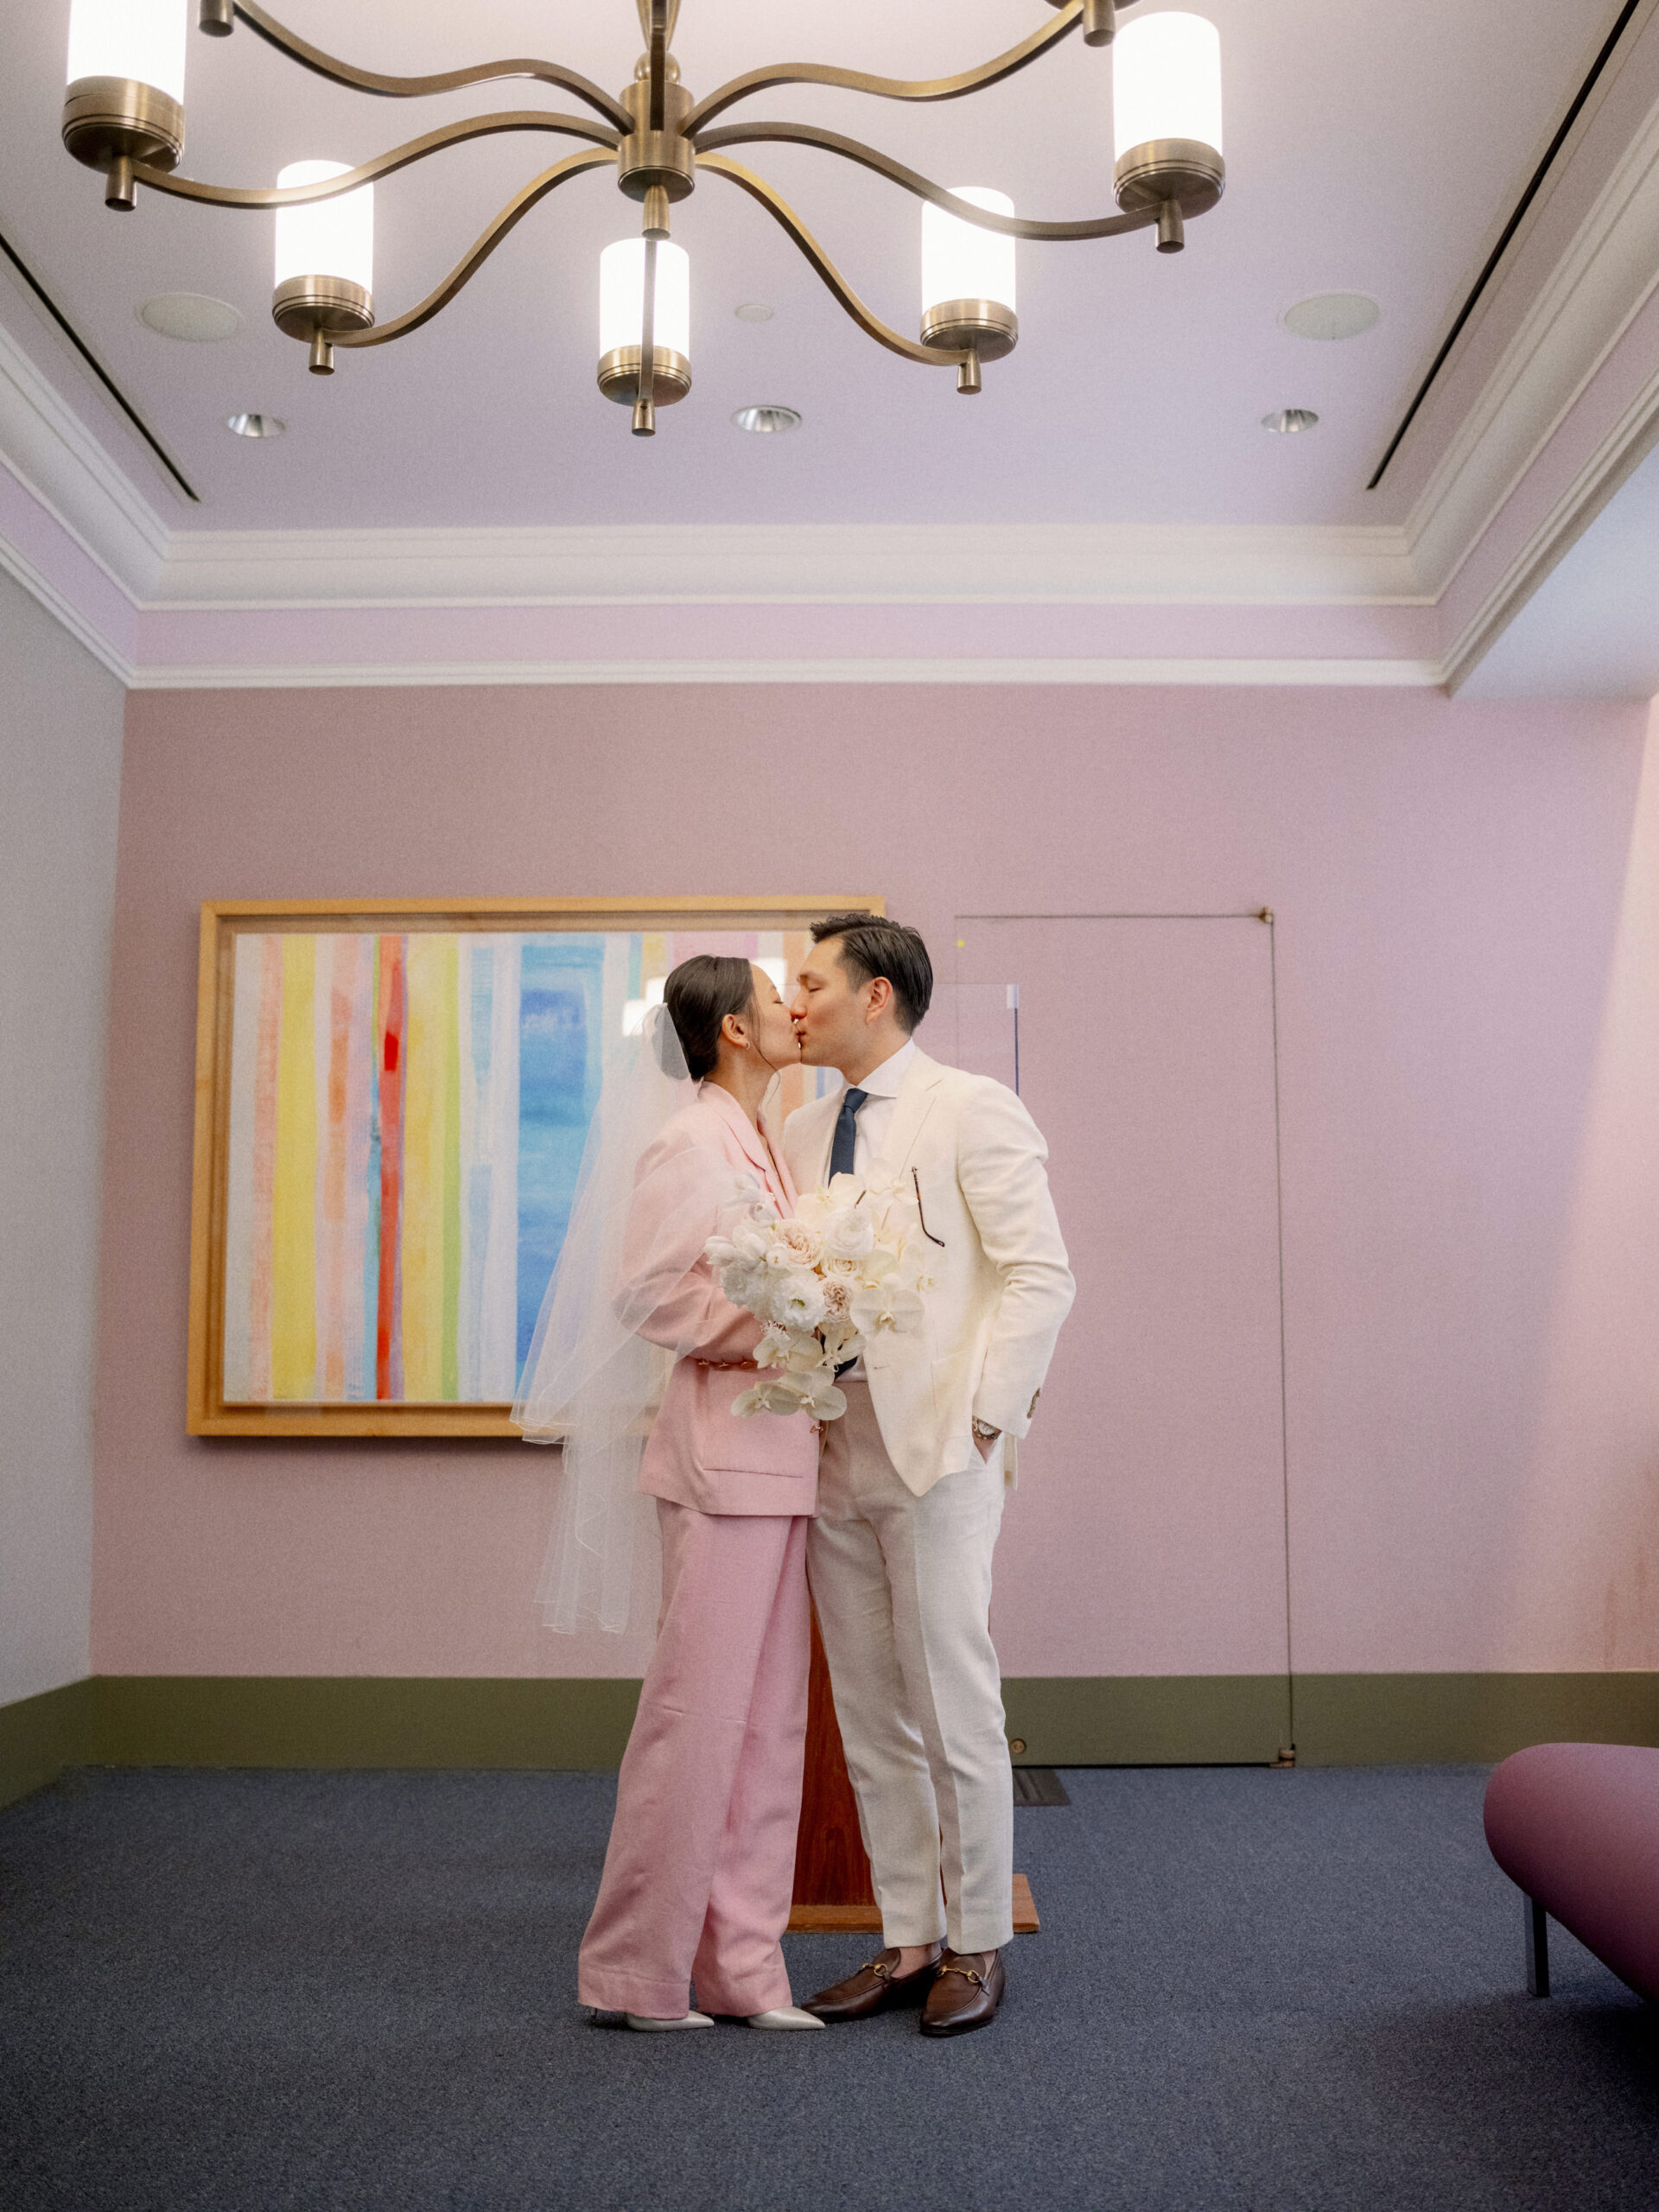 The bride and groom are kissing after the wedding ceremony at Manhattan City Hall NYC. Documentary Wedding Photography Image by Jenny Fu Studio